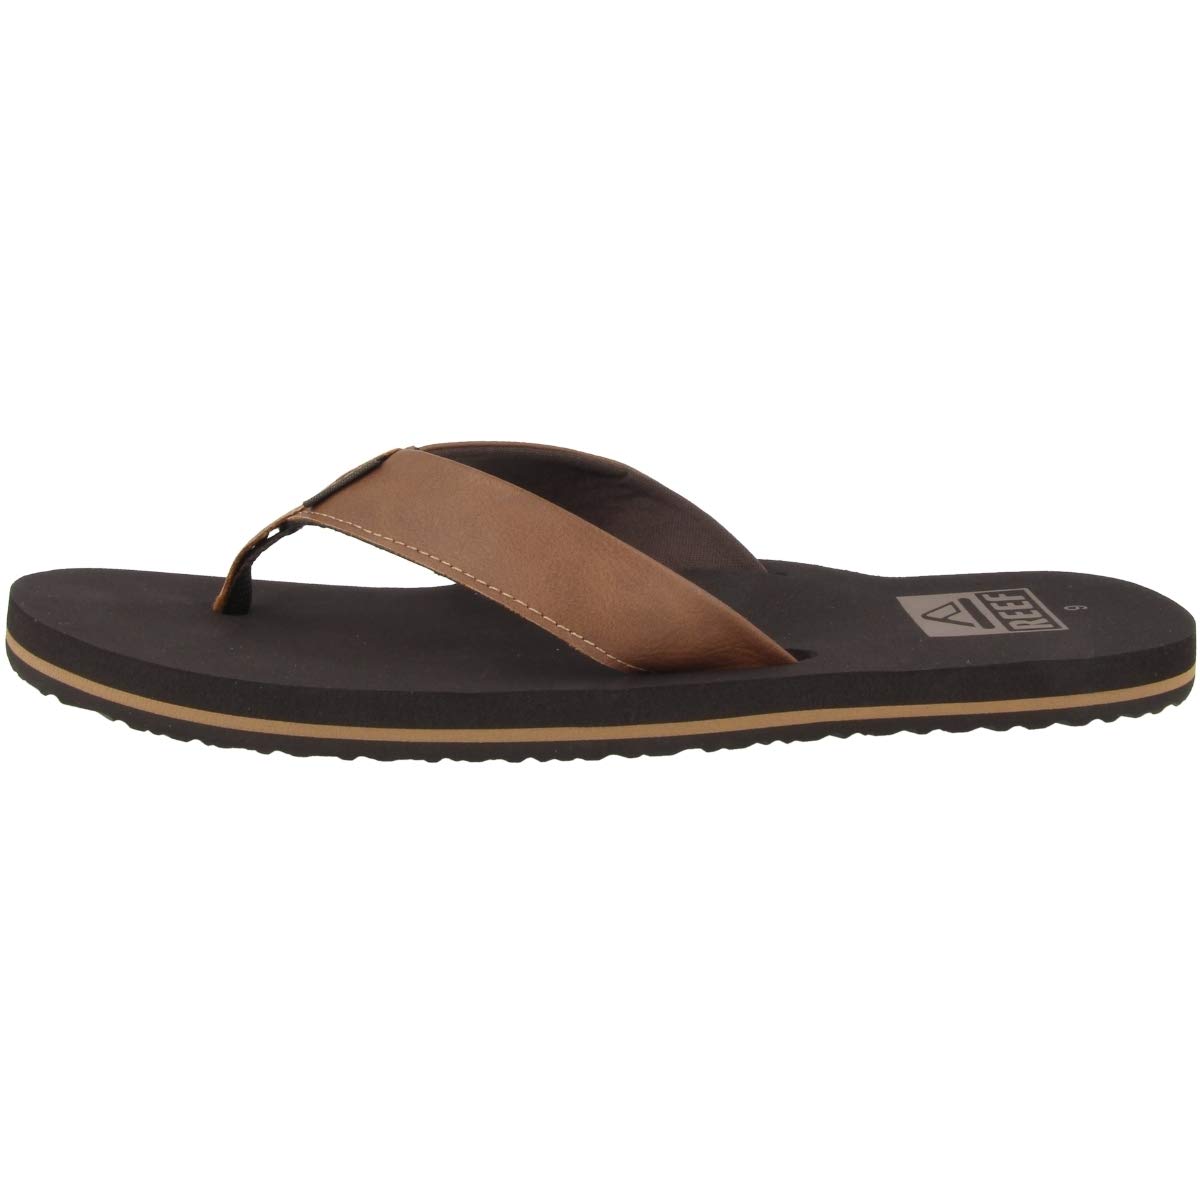 Reef Men's Twinpin Flip-Flop Sandals (Brown or Grey) from $18.93 + Free ...